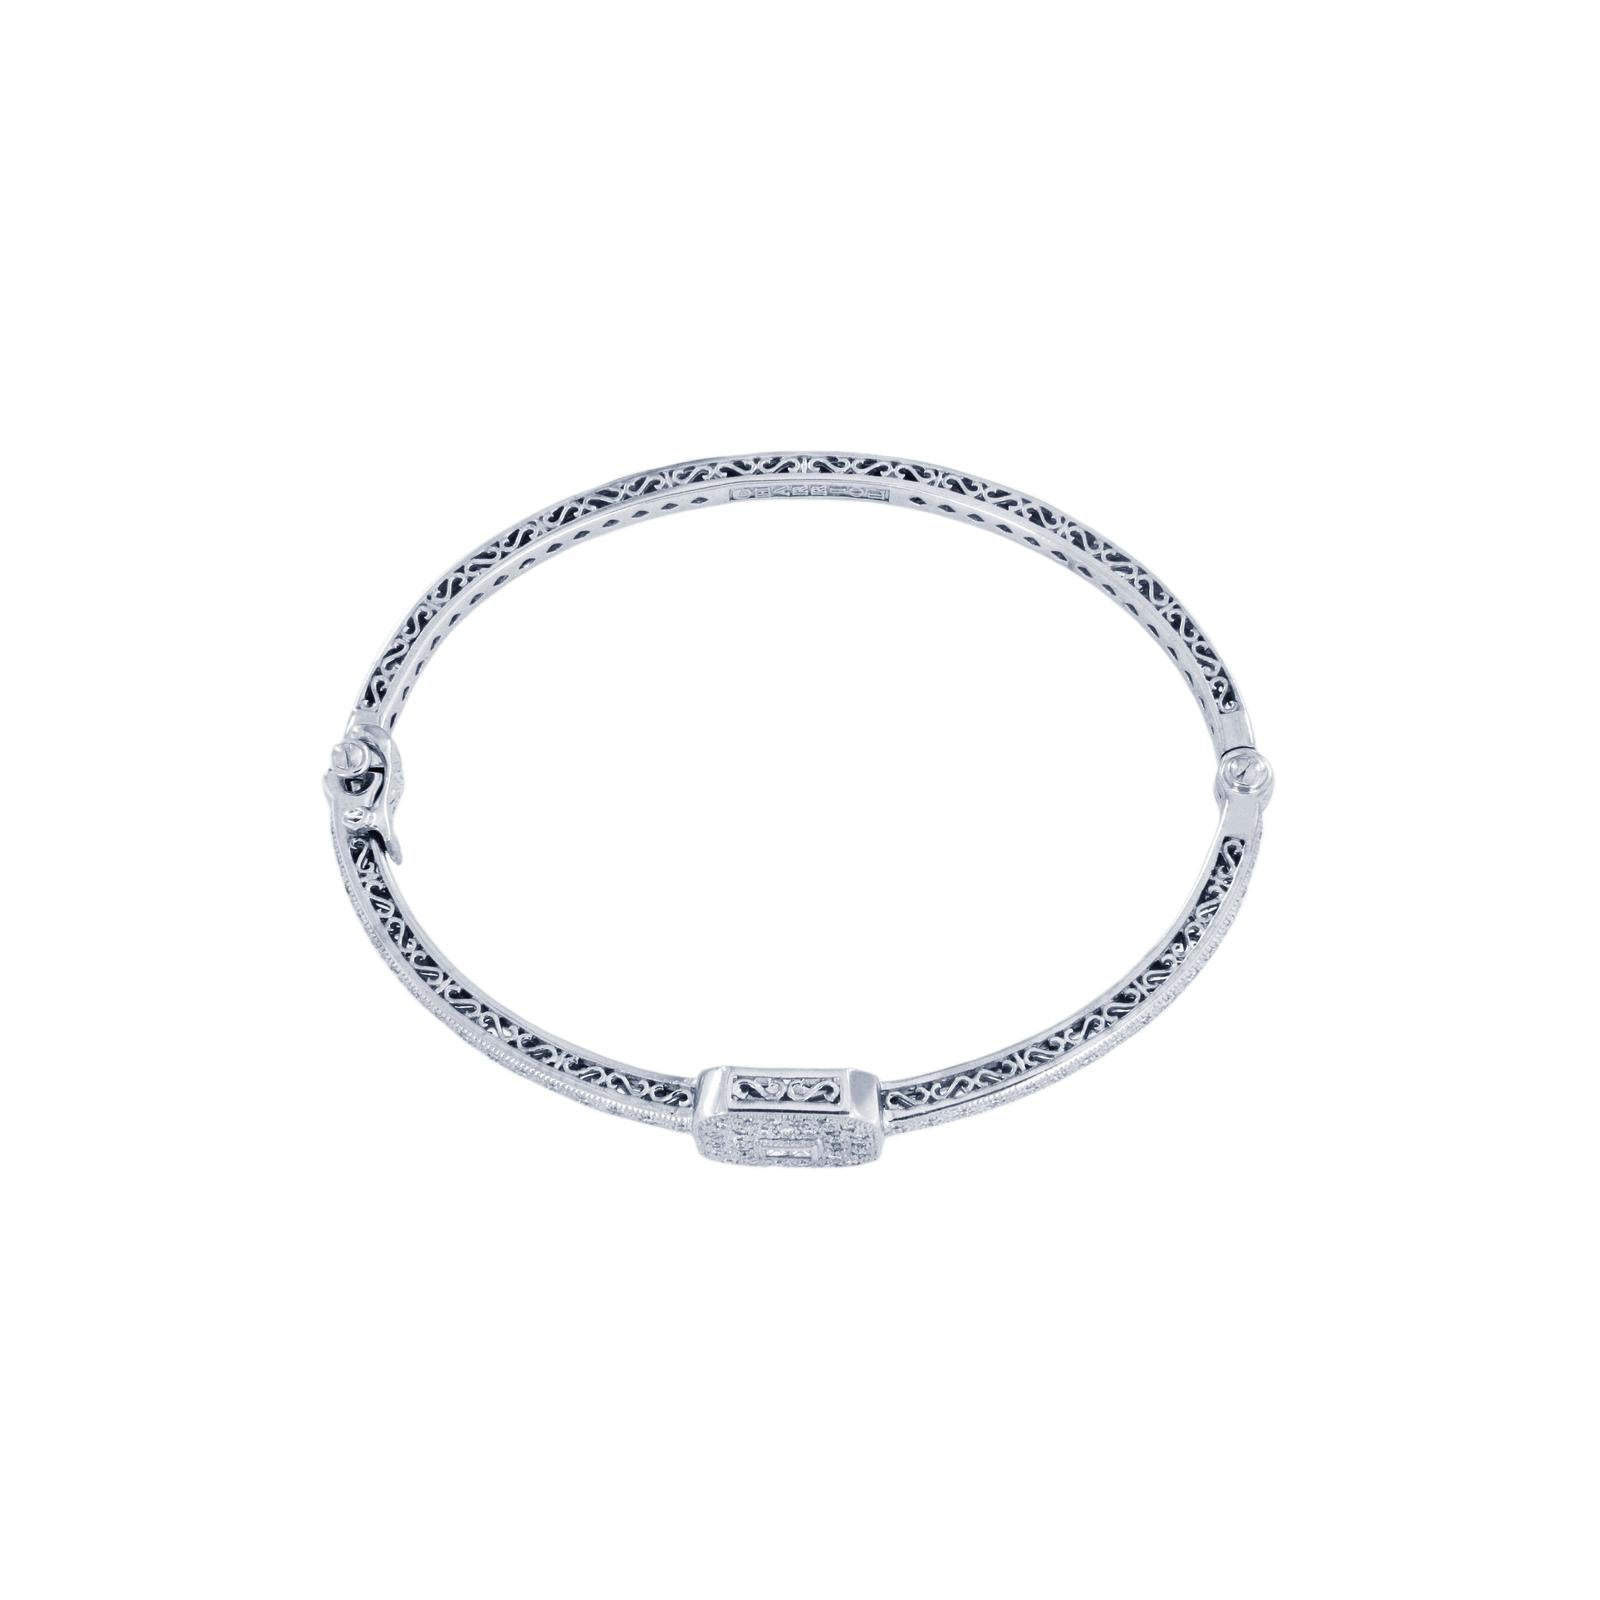 CHARRIOL BLANCHE FLAMME COLLECTION 18K WHITE GOLD DIAMOND BANGLE BRACELET

-Rare Charriol White Gold Bangle with Diamonds
-Mint condition
-18k White Gold
-Weight: 17.5 gr
-Inner circumference: 6.8”
-Ornament Dimension: 10.7x13.5mm
-64 round pave set